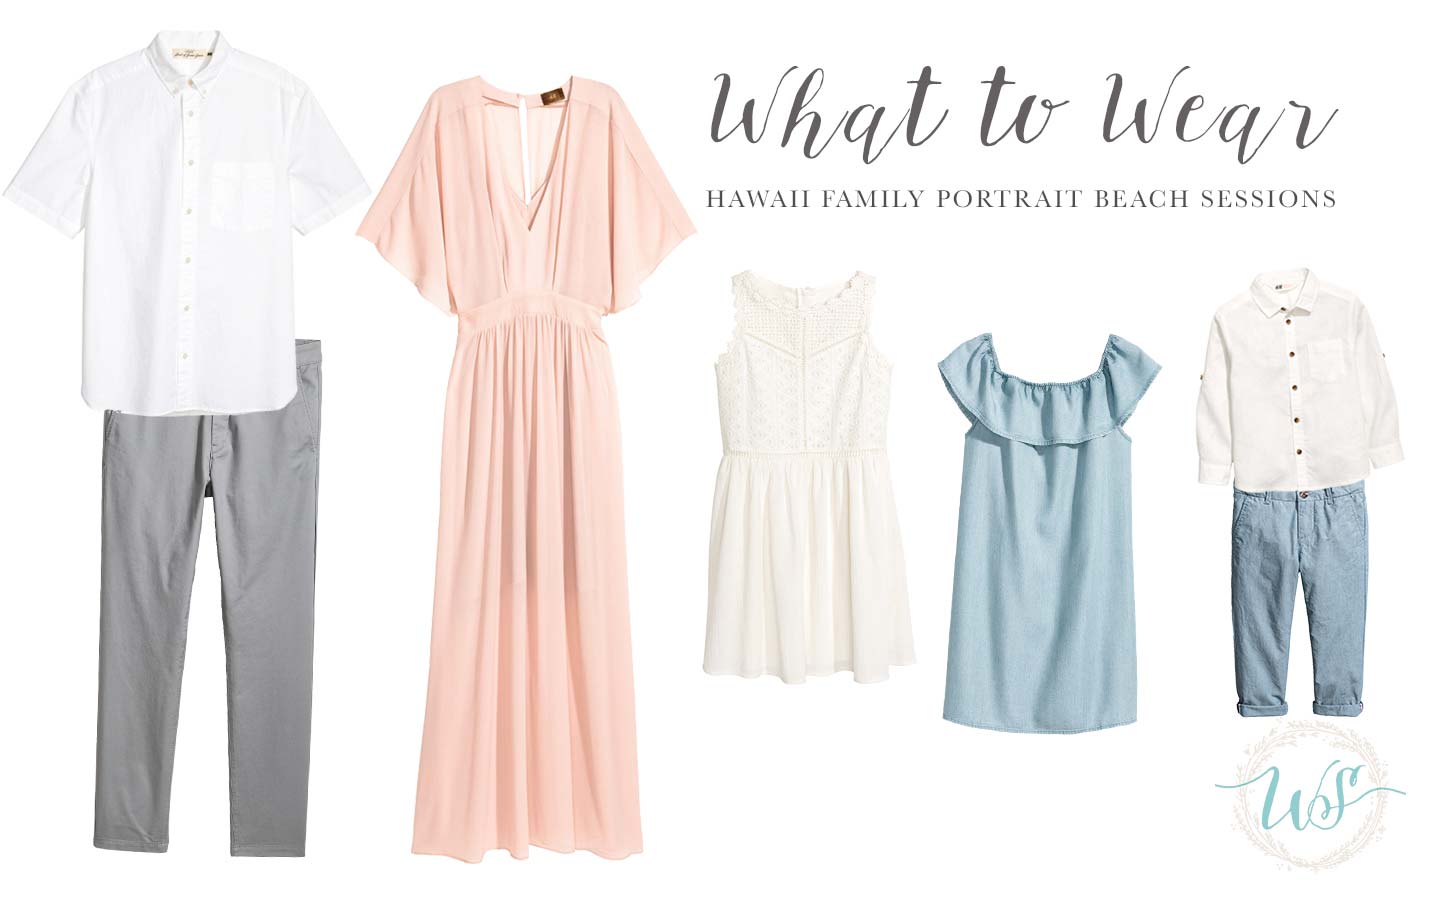 A beautiful long, flowy dress for mom is a classic choice. The blush color set against the pinks and blues from the sunset is a nearly guaranteed perfect look. Dress dad and kids in complimentary neutral colors, leaning towards solid colors to keep …